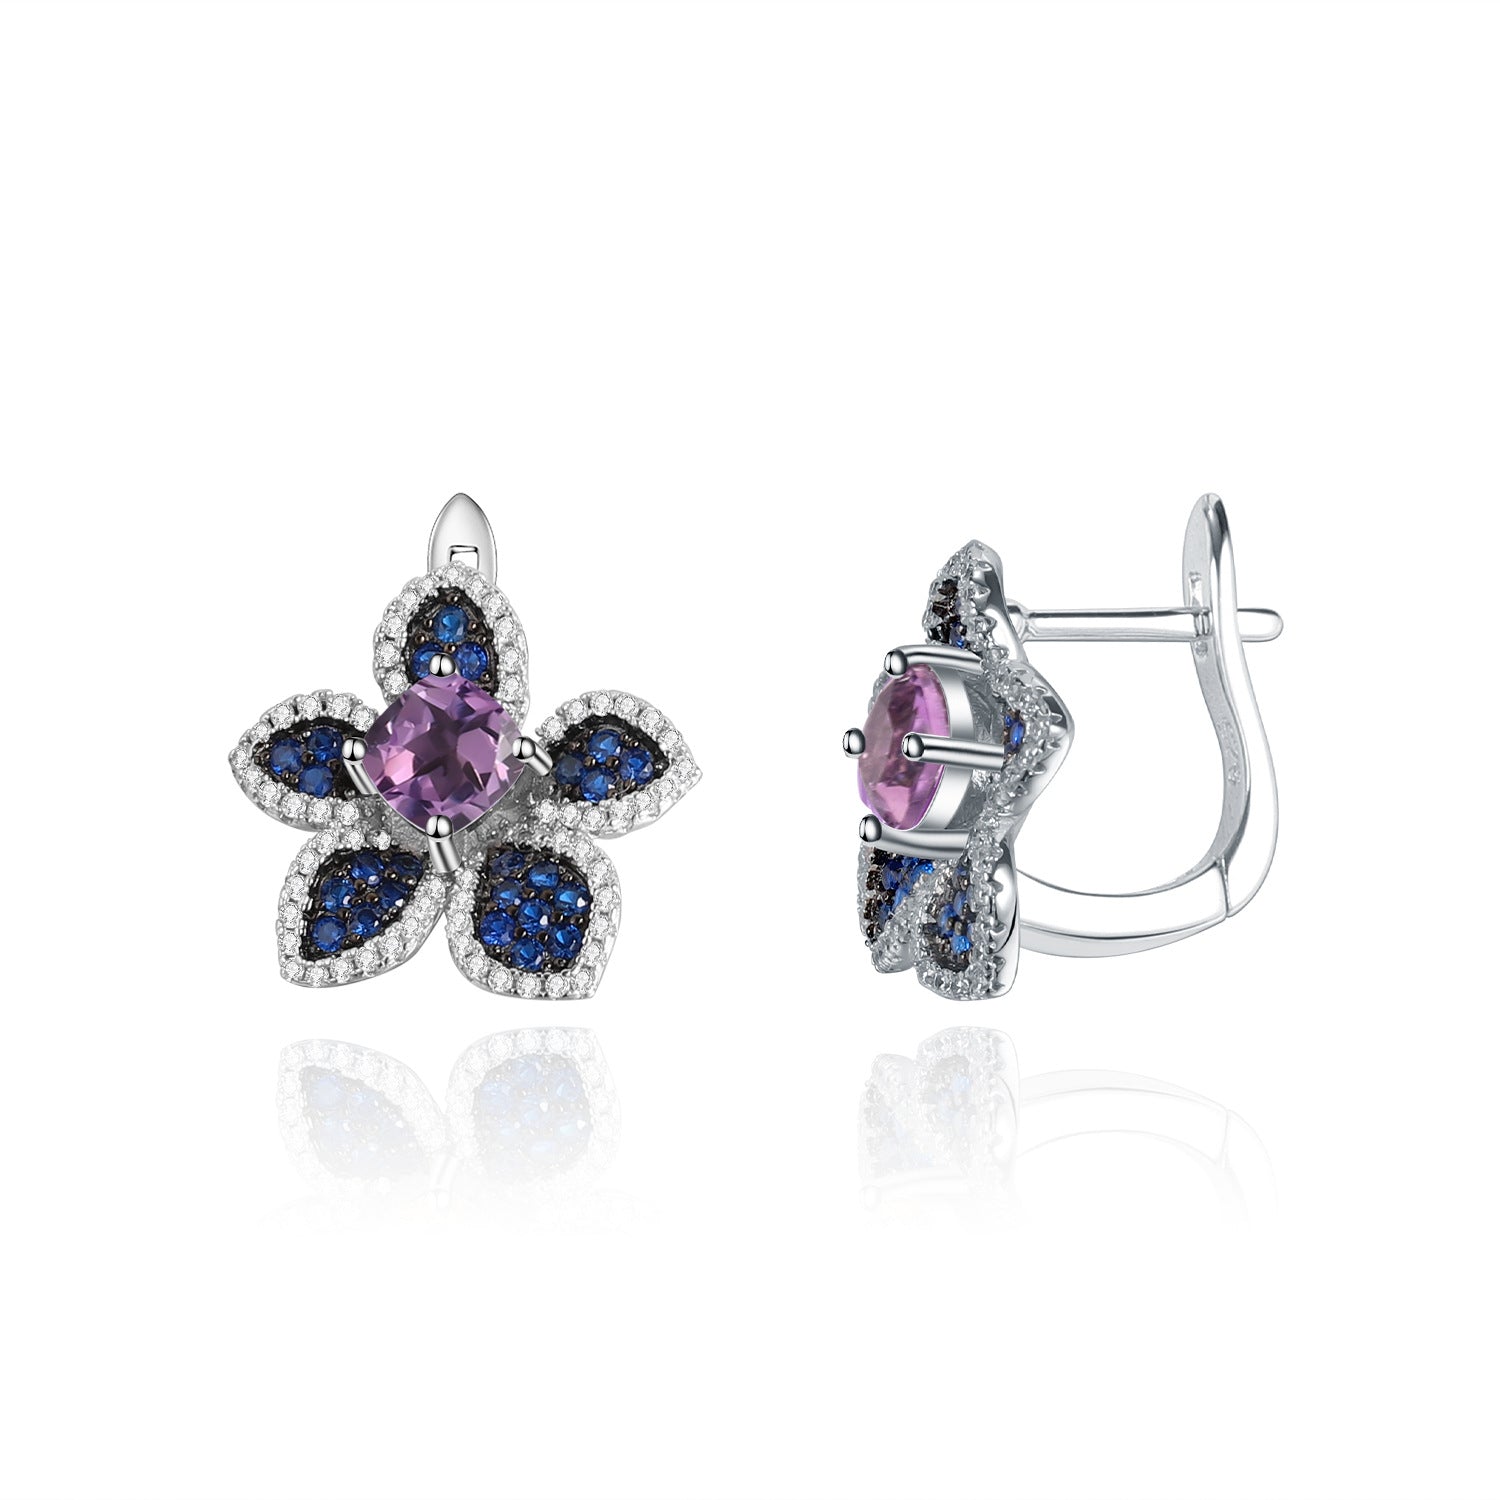 Simple Natural Style Inlaid Colourful Gemstoes Floral Sterling Silver Studs Earrings for Women